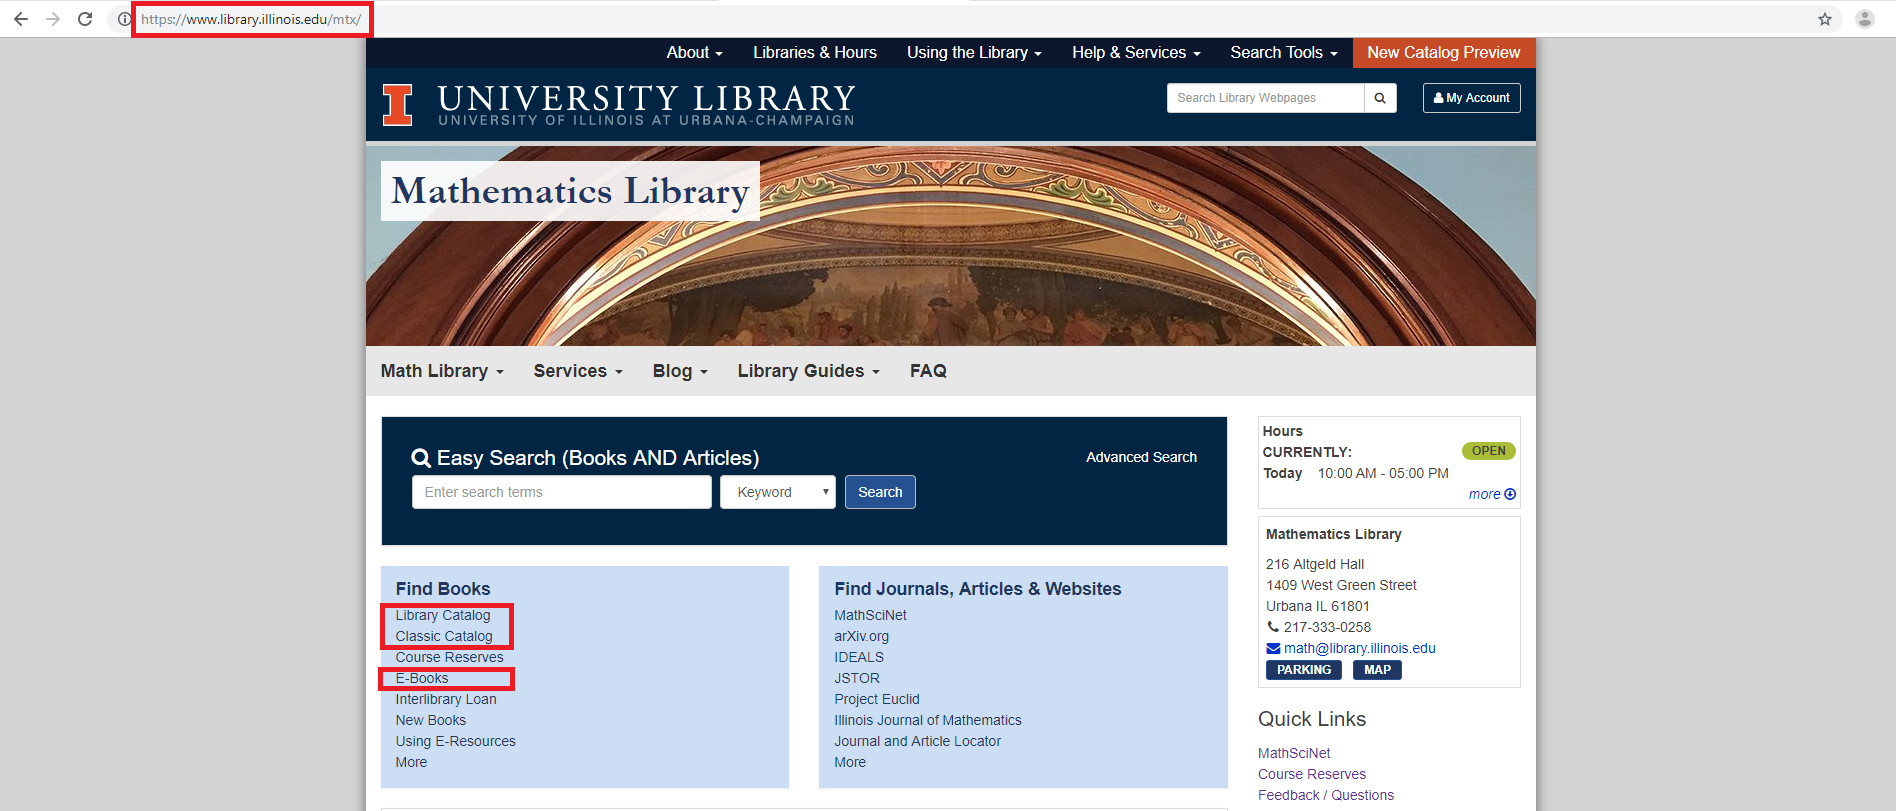 Red rectangles highlight the URL for the Mathematics Website and links to the Library Catalog, Classic Catalog, and the E-Books page.